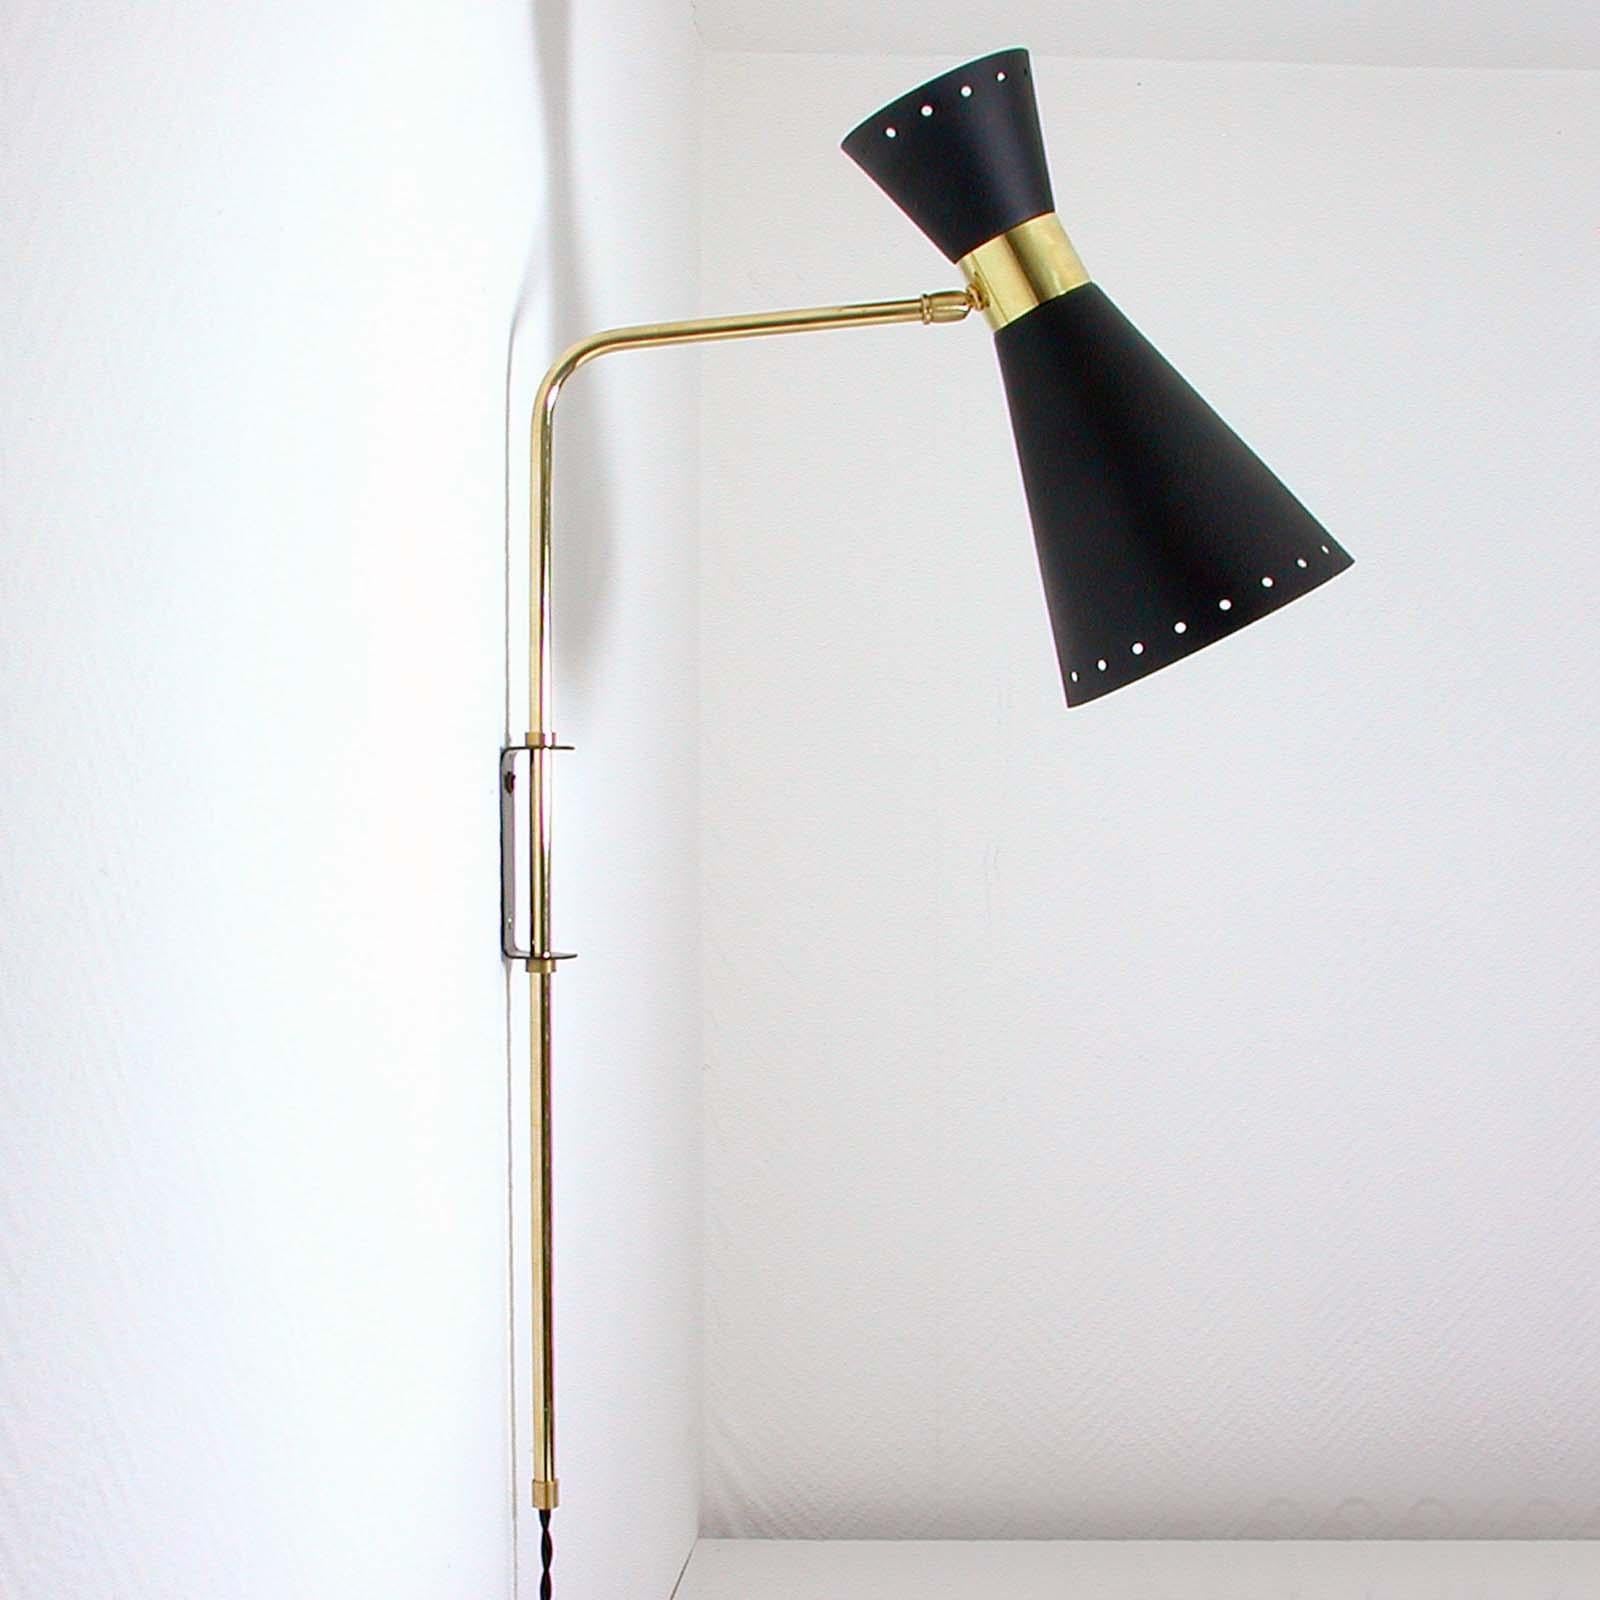 This awesome articulating wall lamp with adjustable shade and height adjustable lamp arm was made in France in the 1950s. The light features a lampshade made of black lacquered metal with brass details. The swiveling and adjustable lamp arm is made